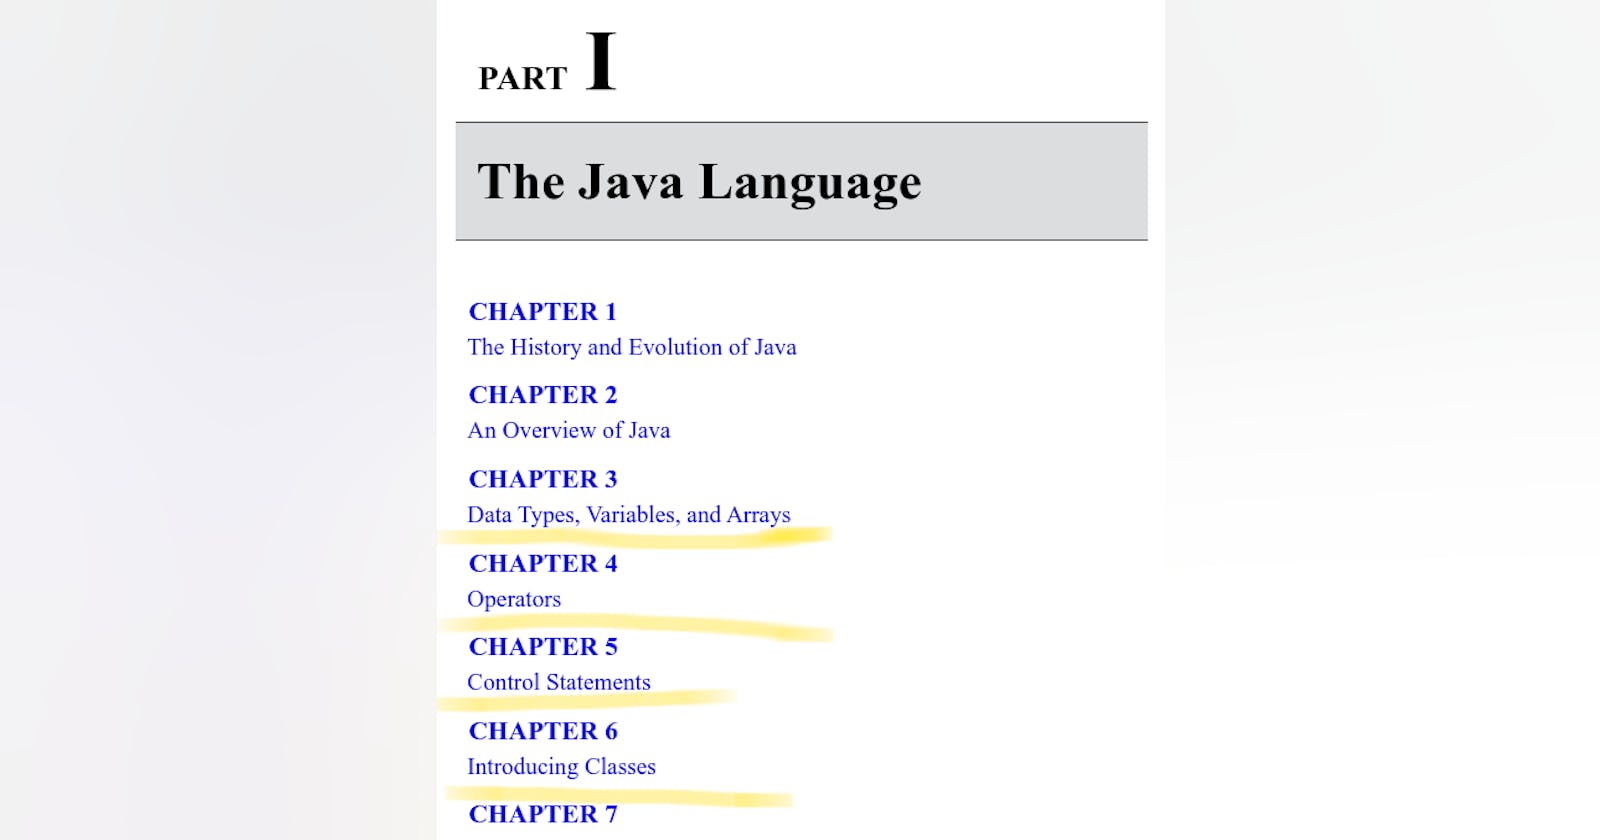 The fast way of learning a new programming language - Part II